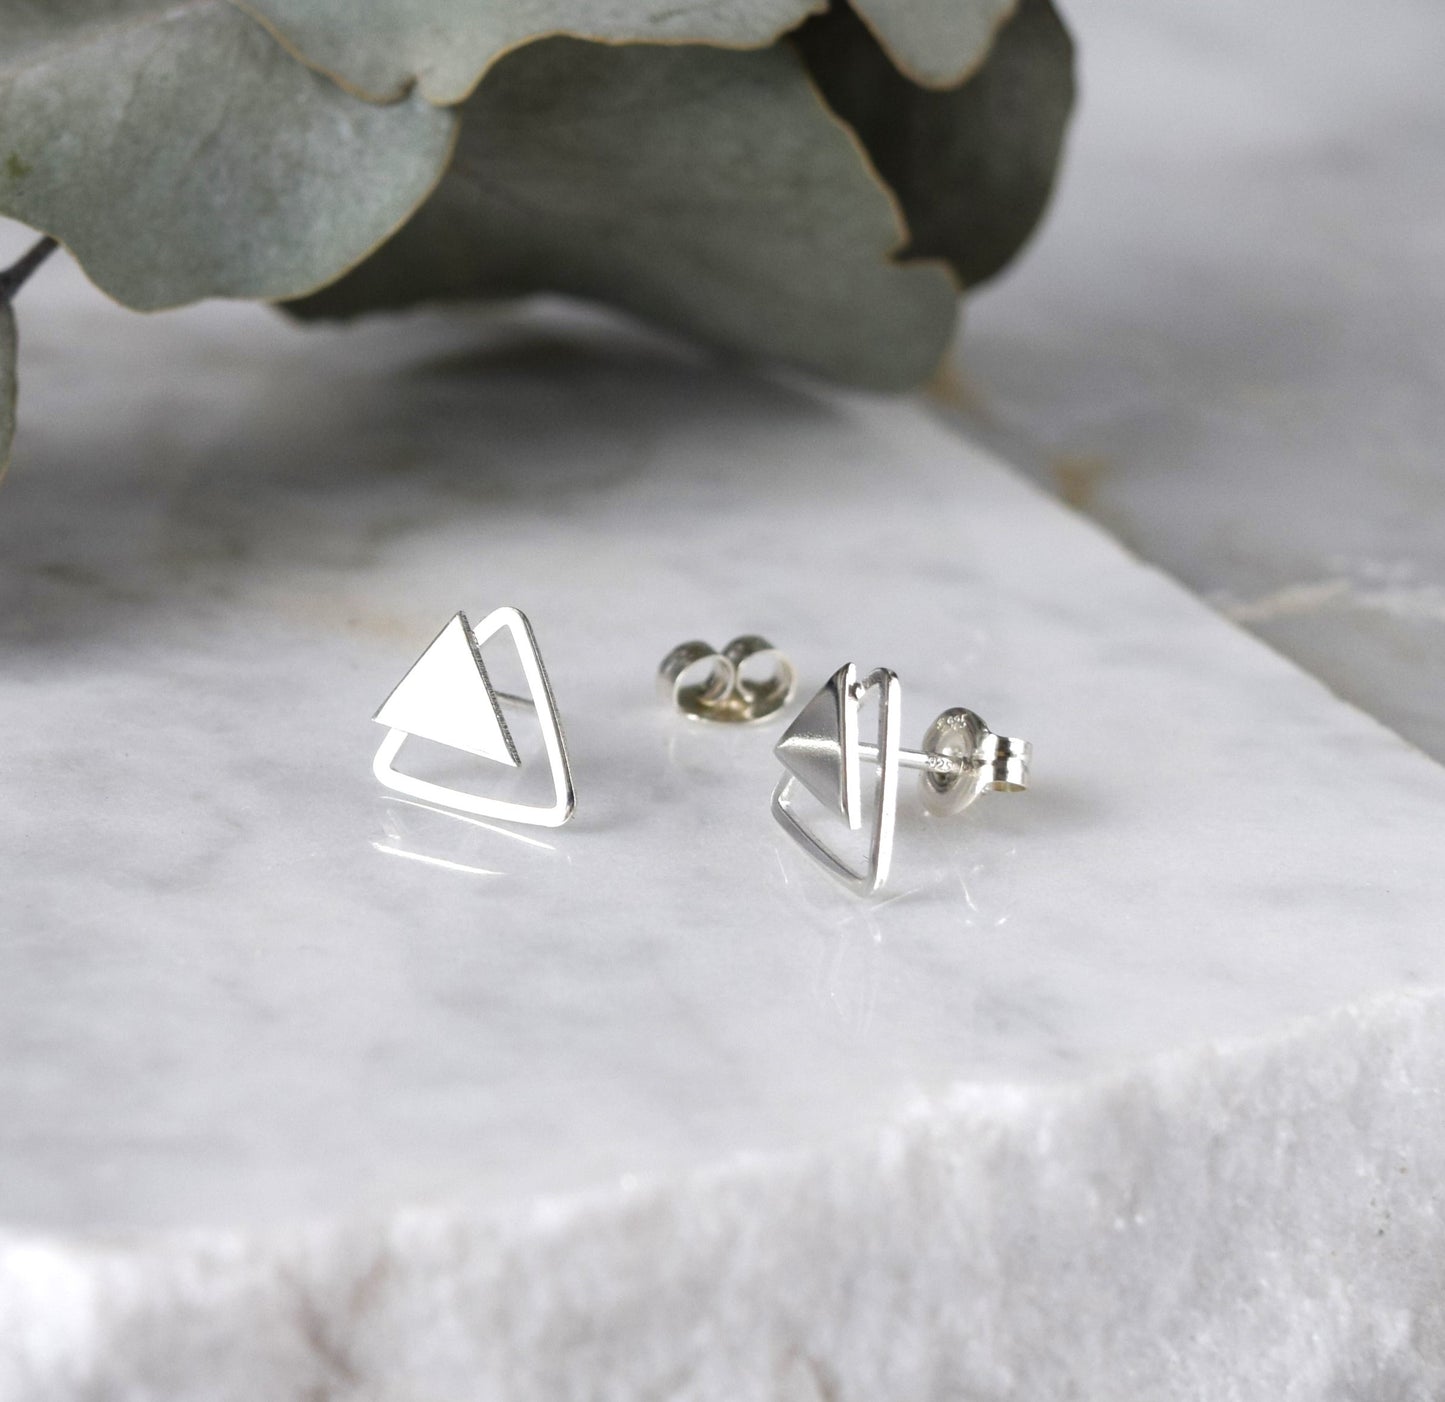 Product image of double triangle earrings on white background